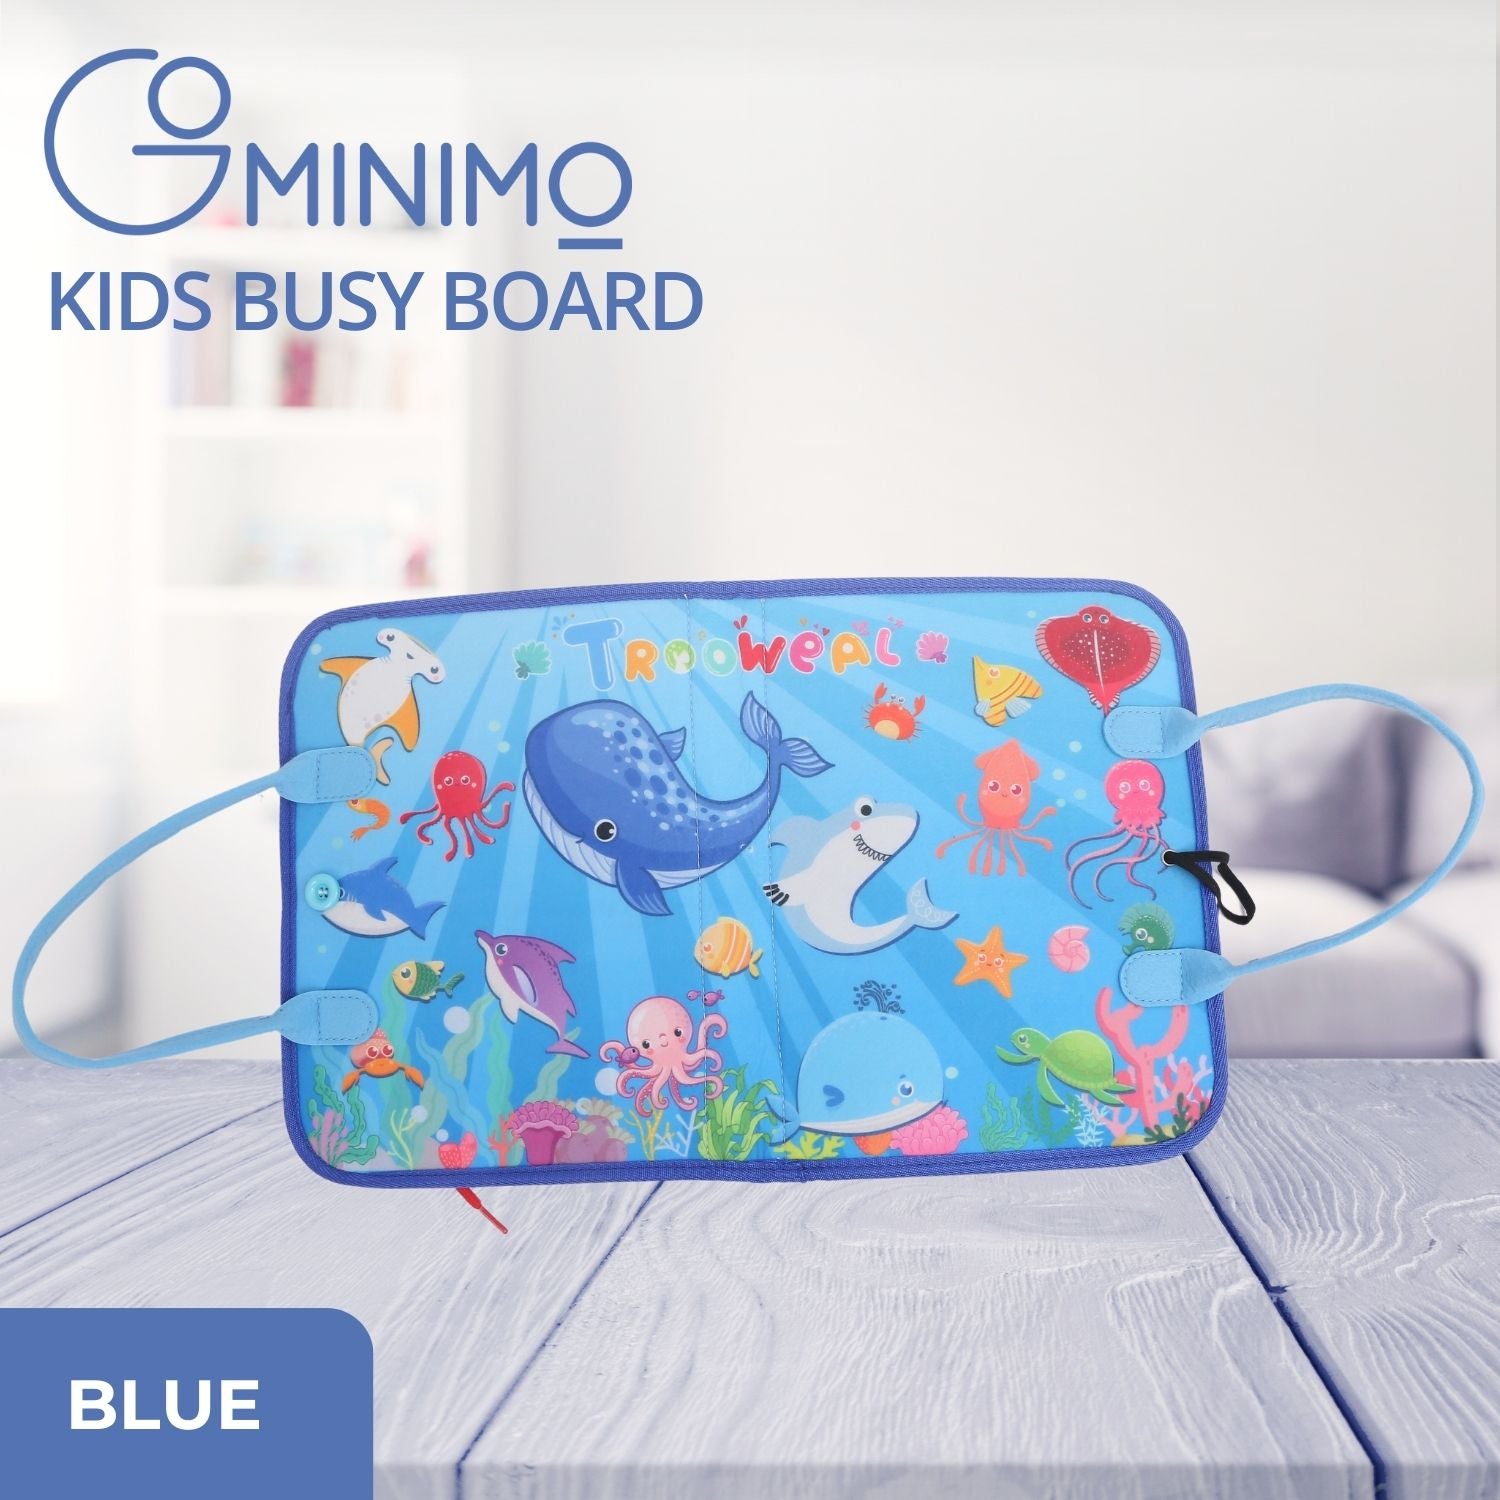 GOMINIMO Kids Busy Board Learning Toys (Blue)